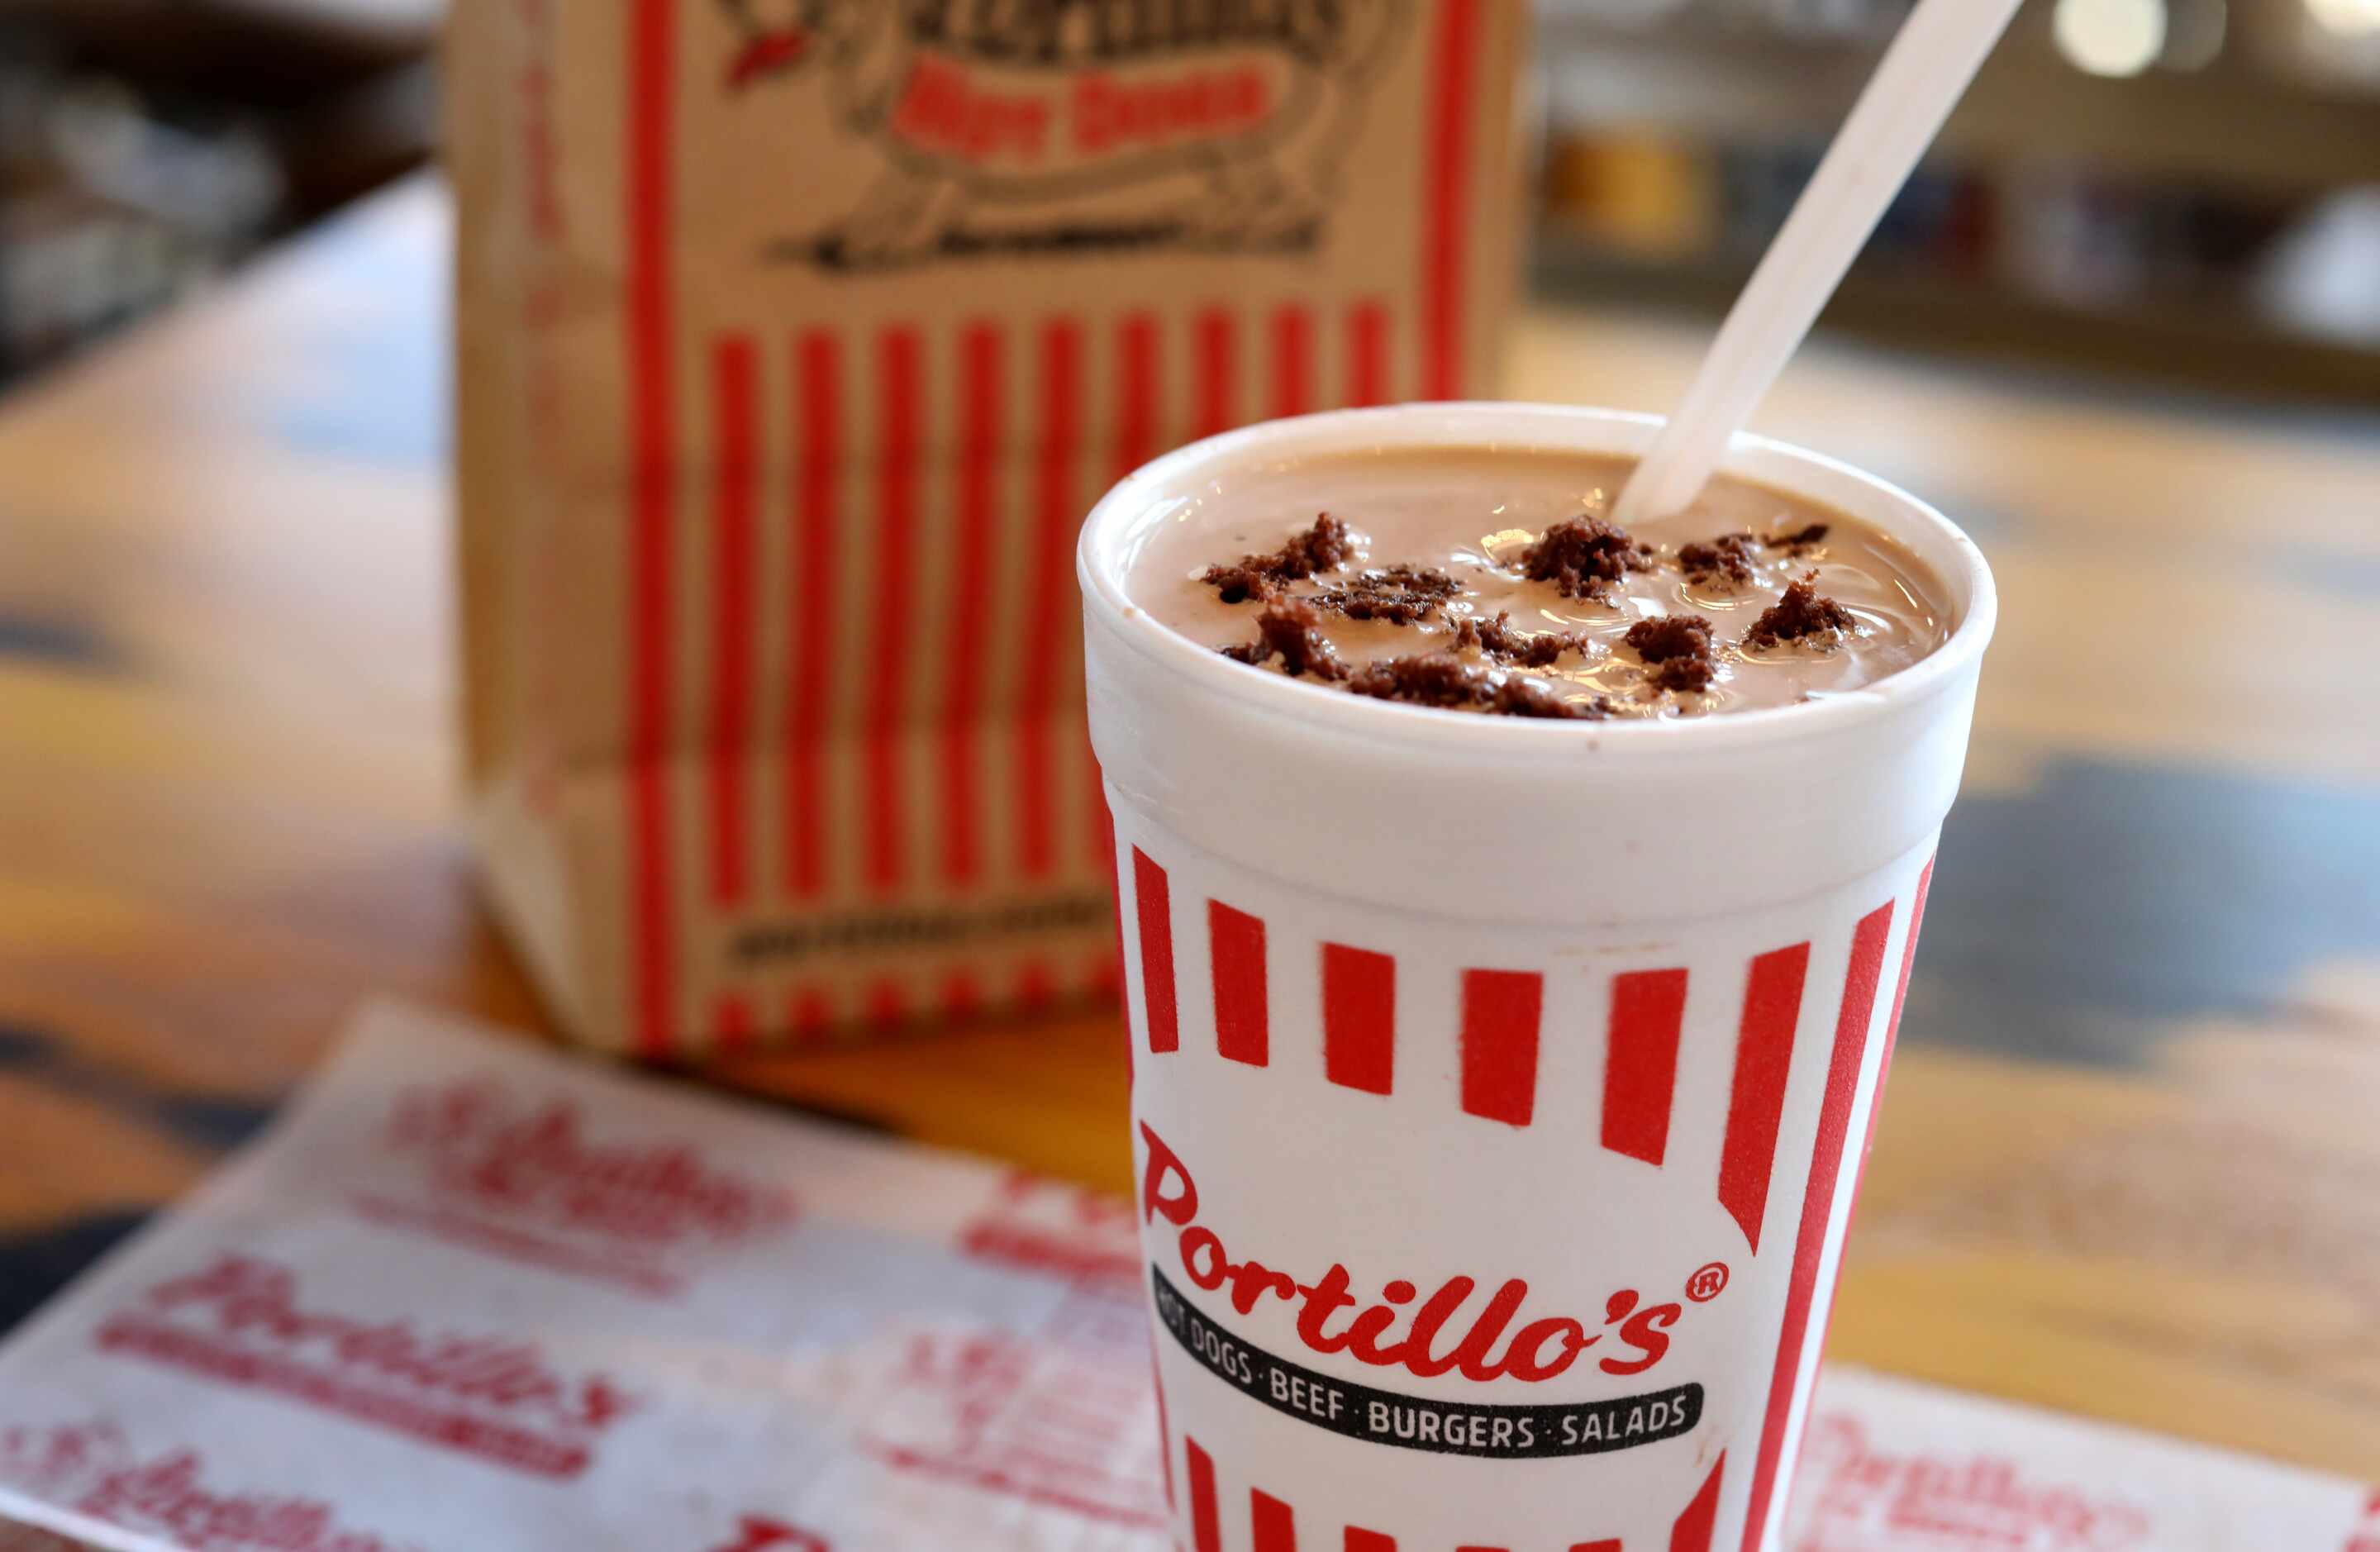 The Chocolate Cake Shake is one of Portillo's most popular desserts.